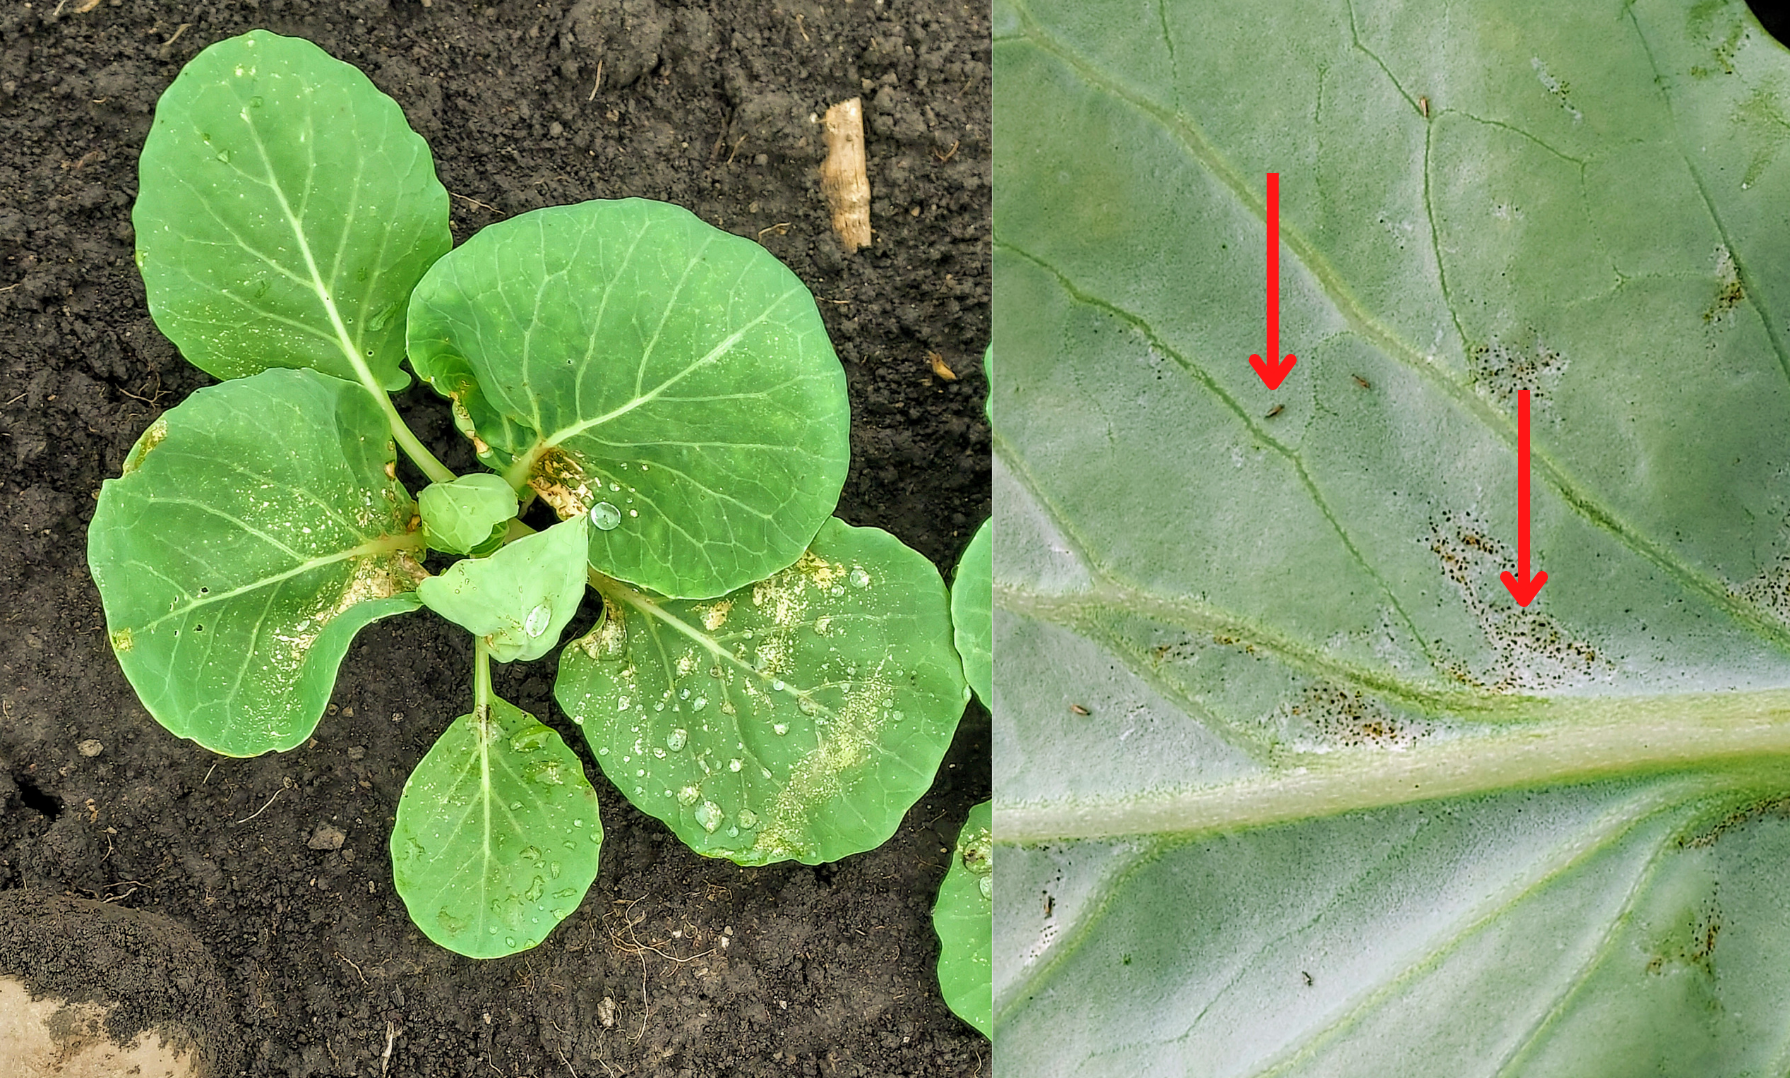 Thrips and cabbage